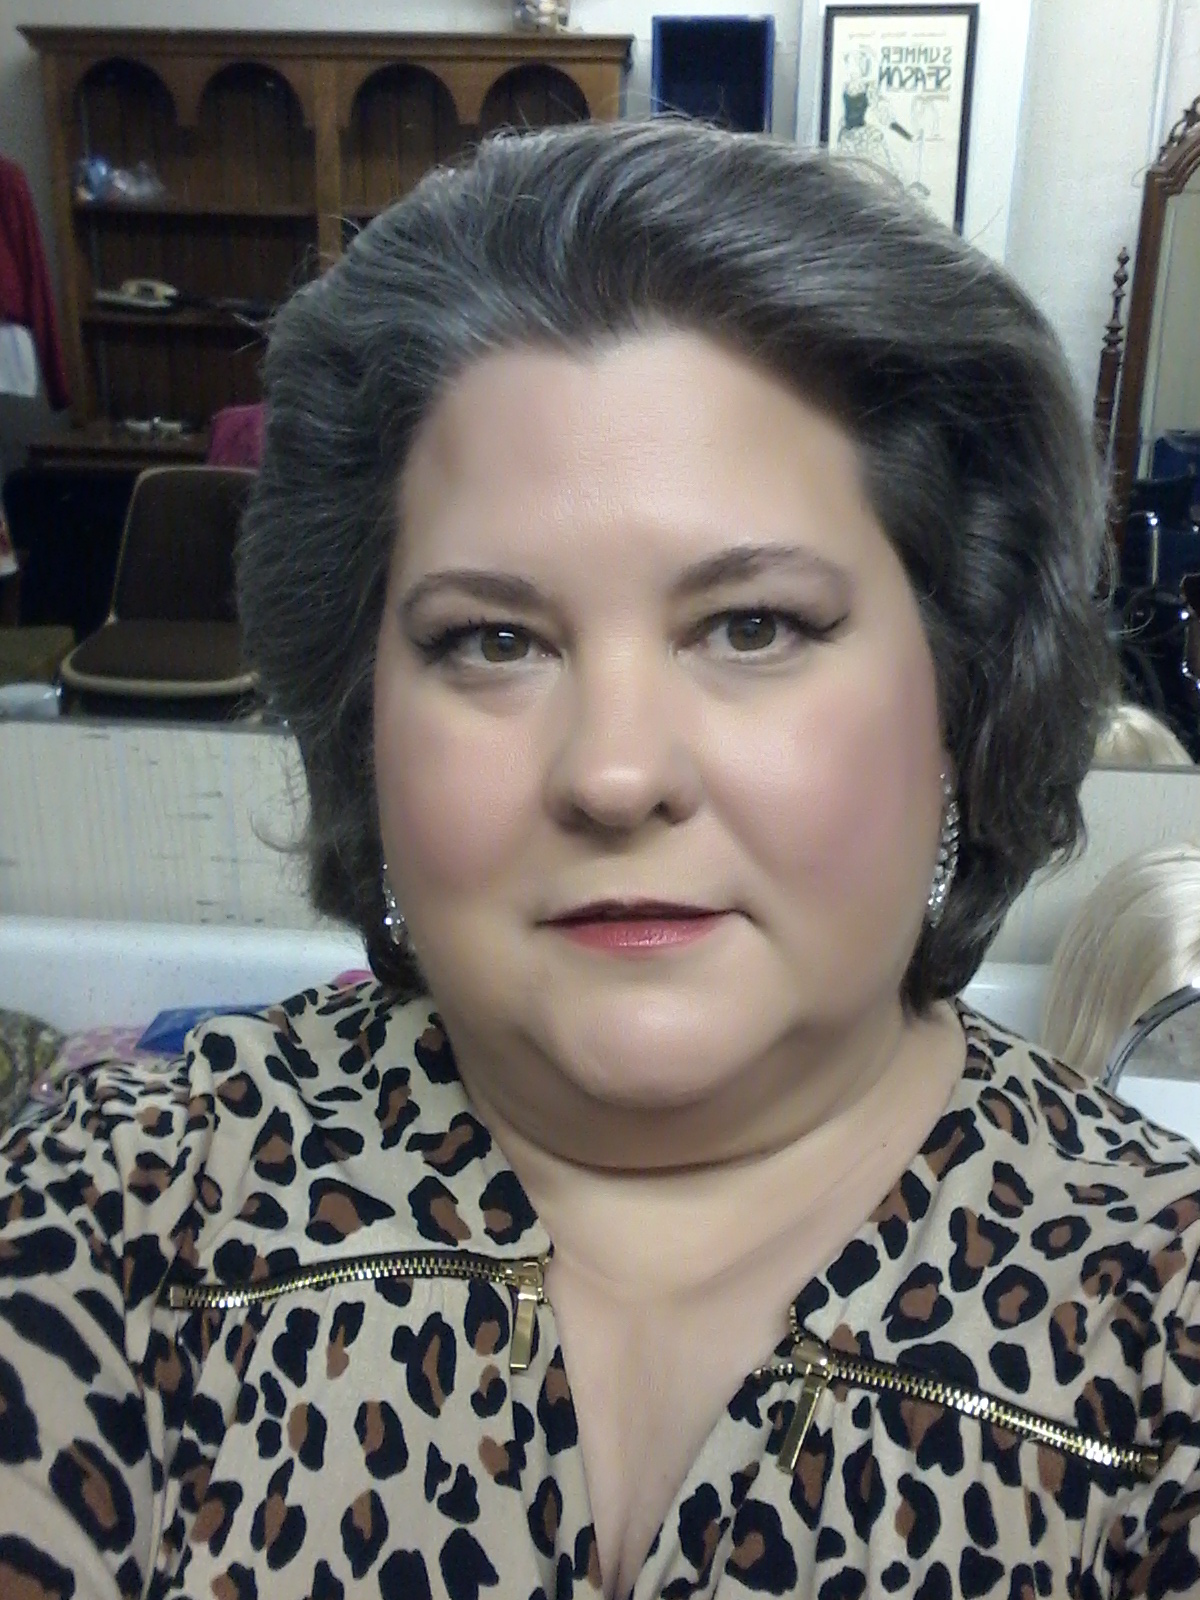 Backstage on Opening Night of the play Clue at Renaissance Theater.